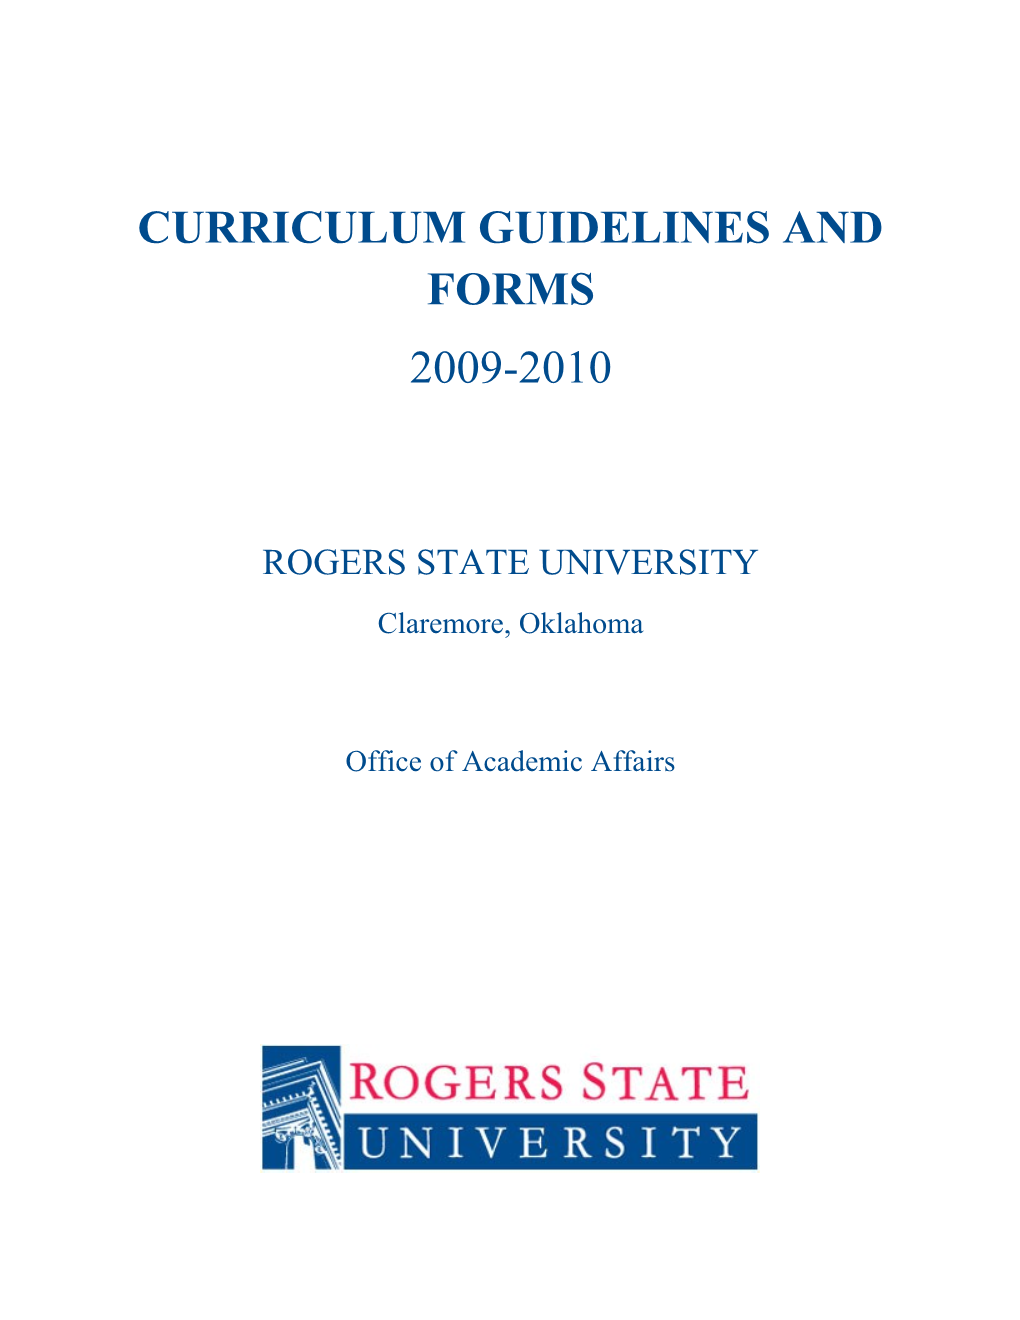 Curriculum Guidelines and Forms